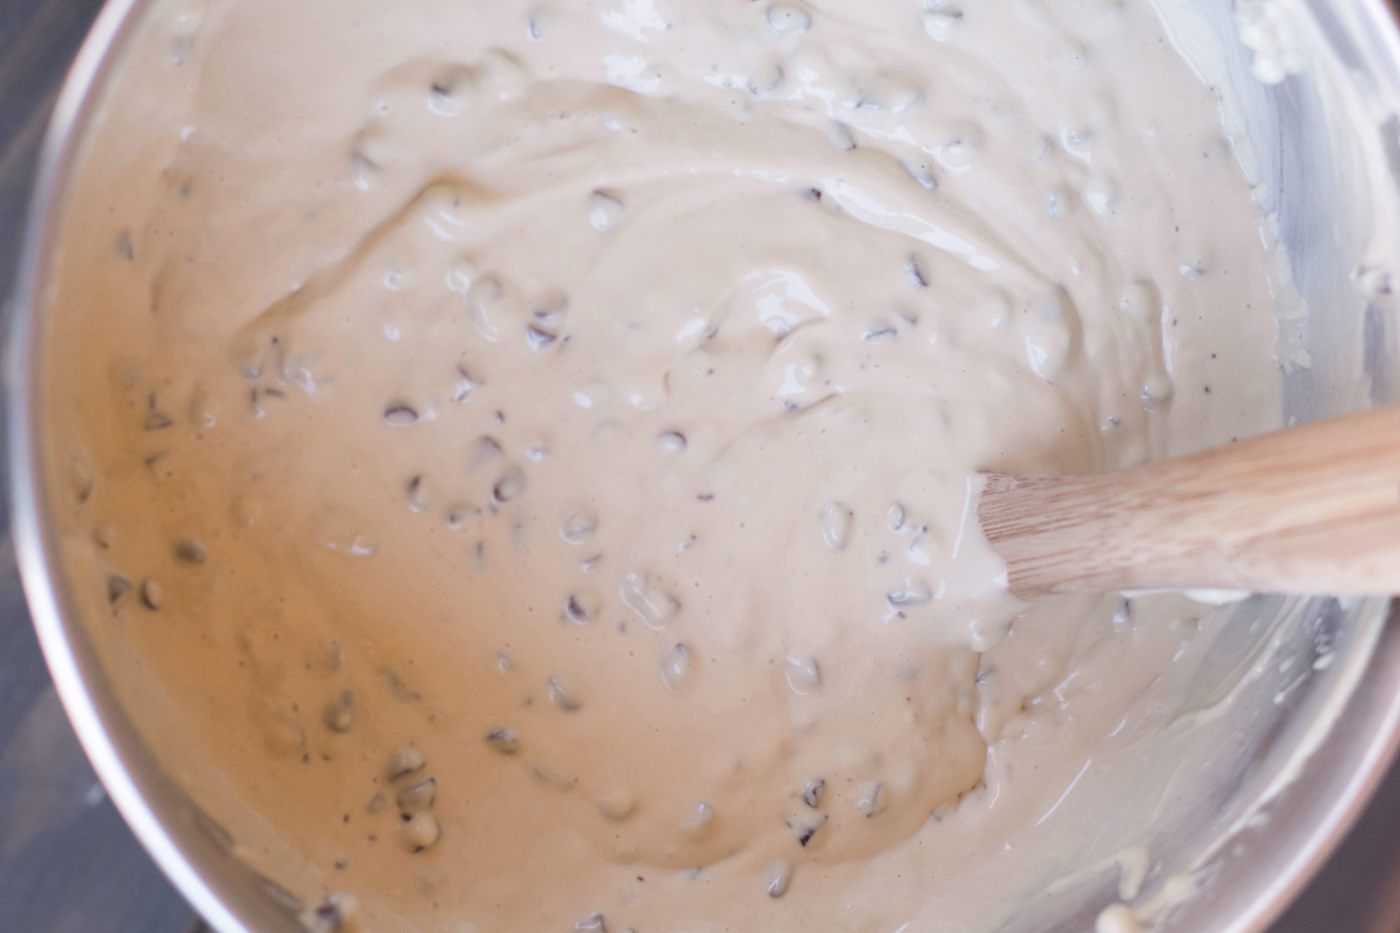 Mini chocolate chips mixed into the batter